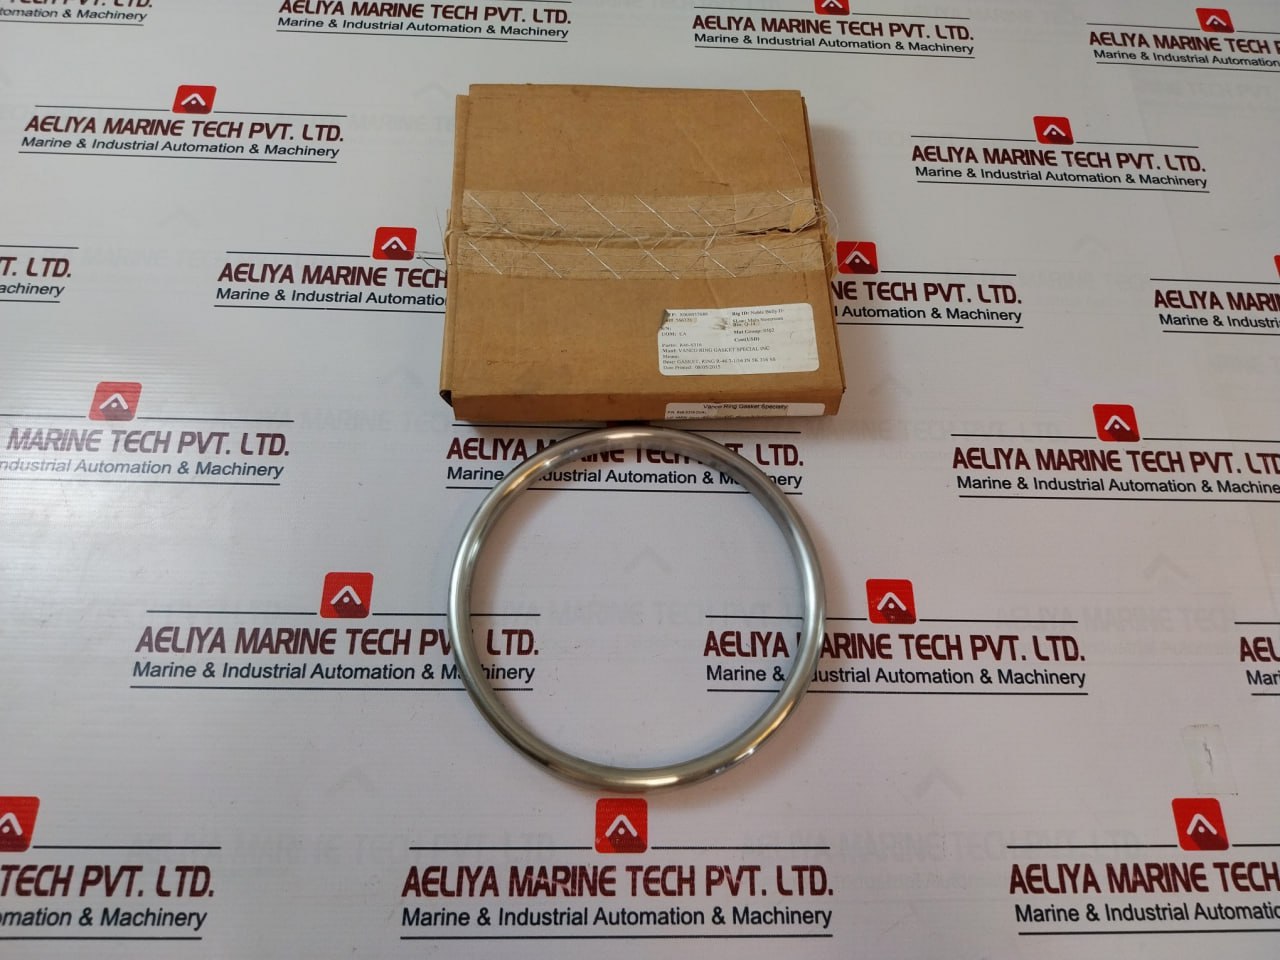 Vanco 6A0003 Gasket Ring R46-s316-oval
